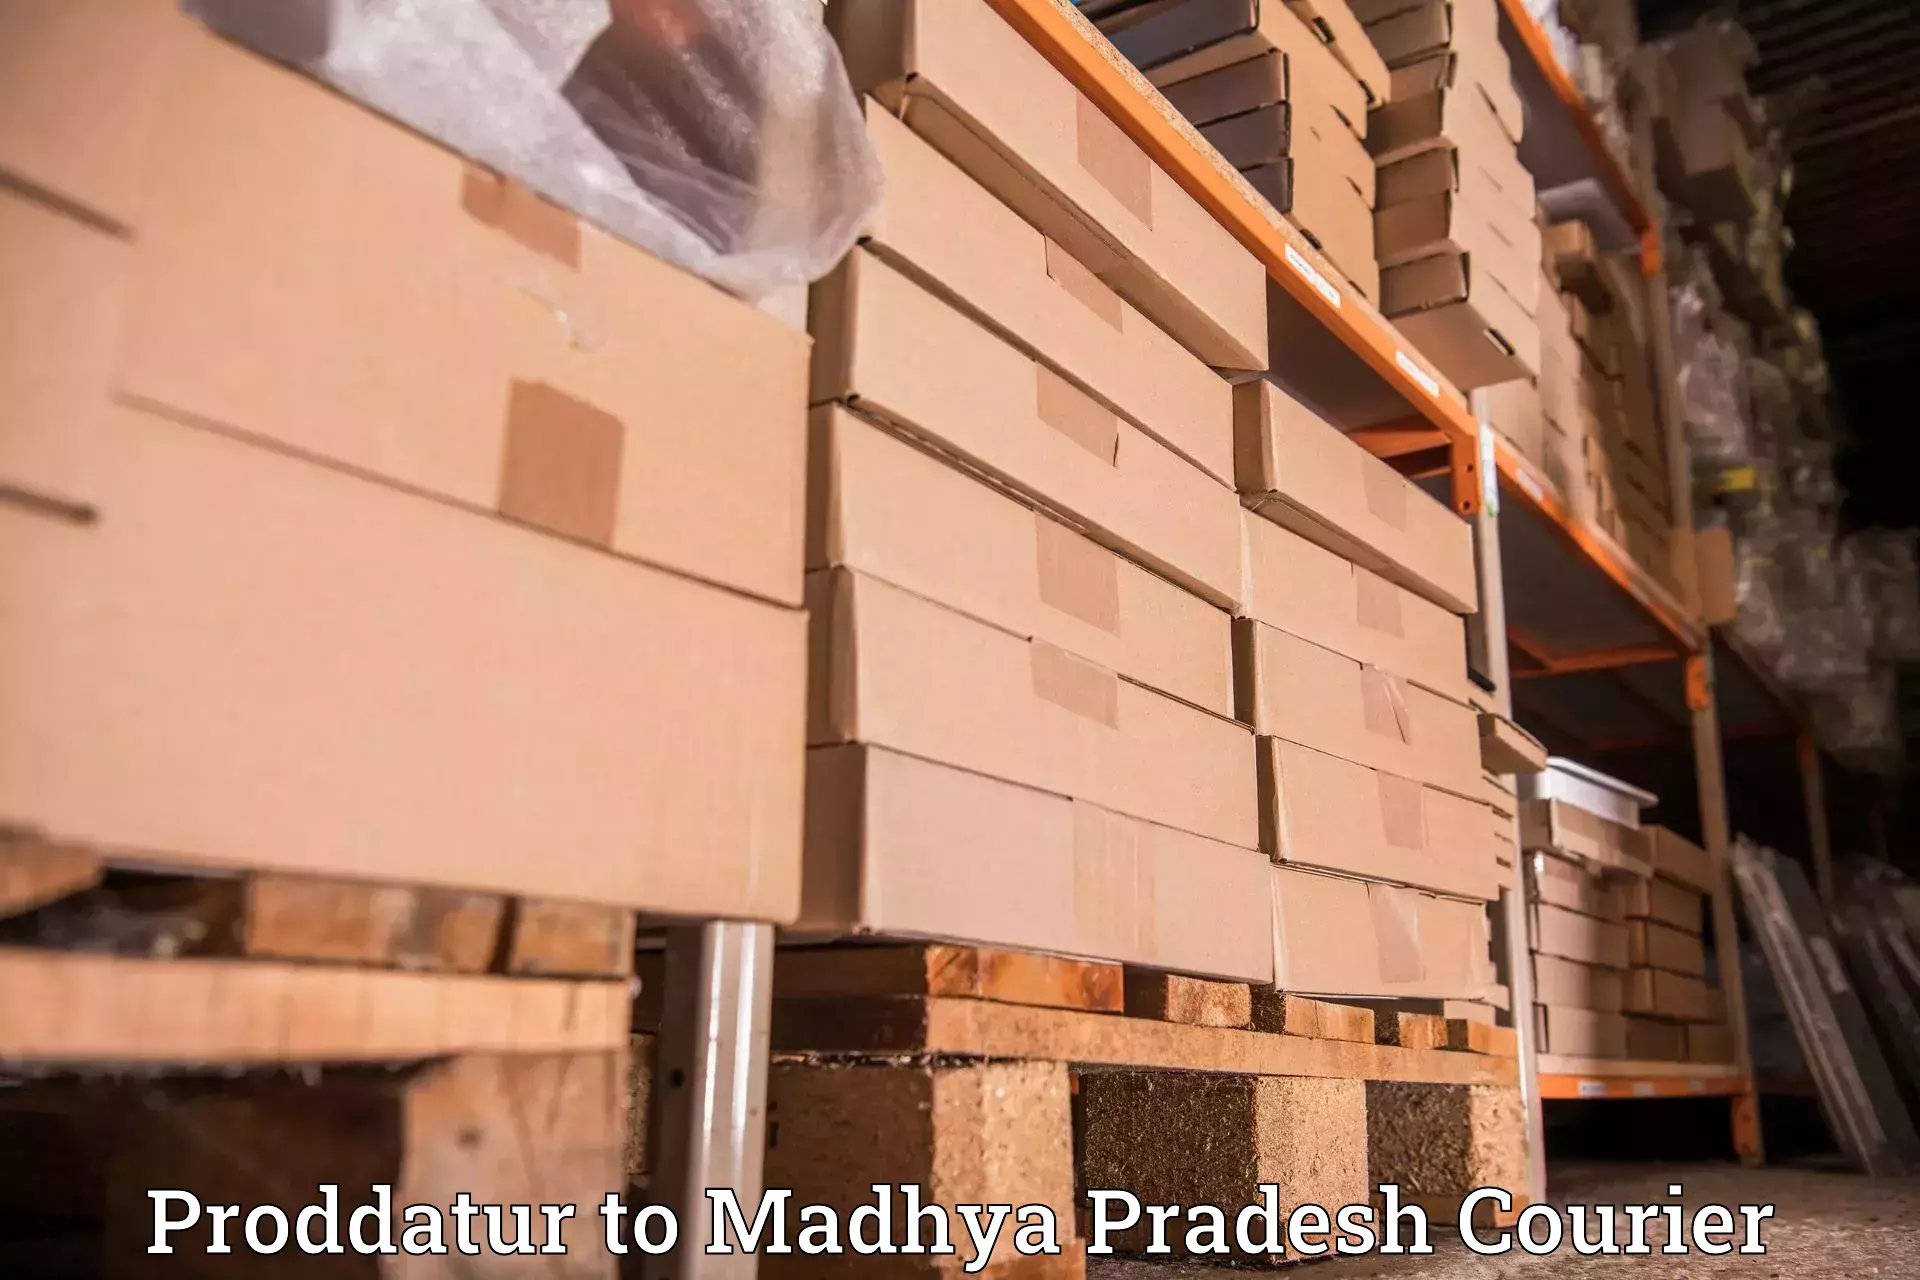 Large-scale shipping solutions Proddatur to Ratlam